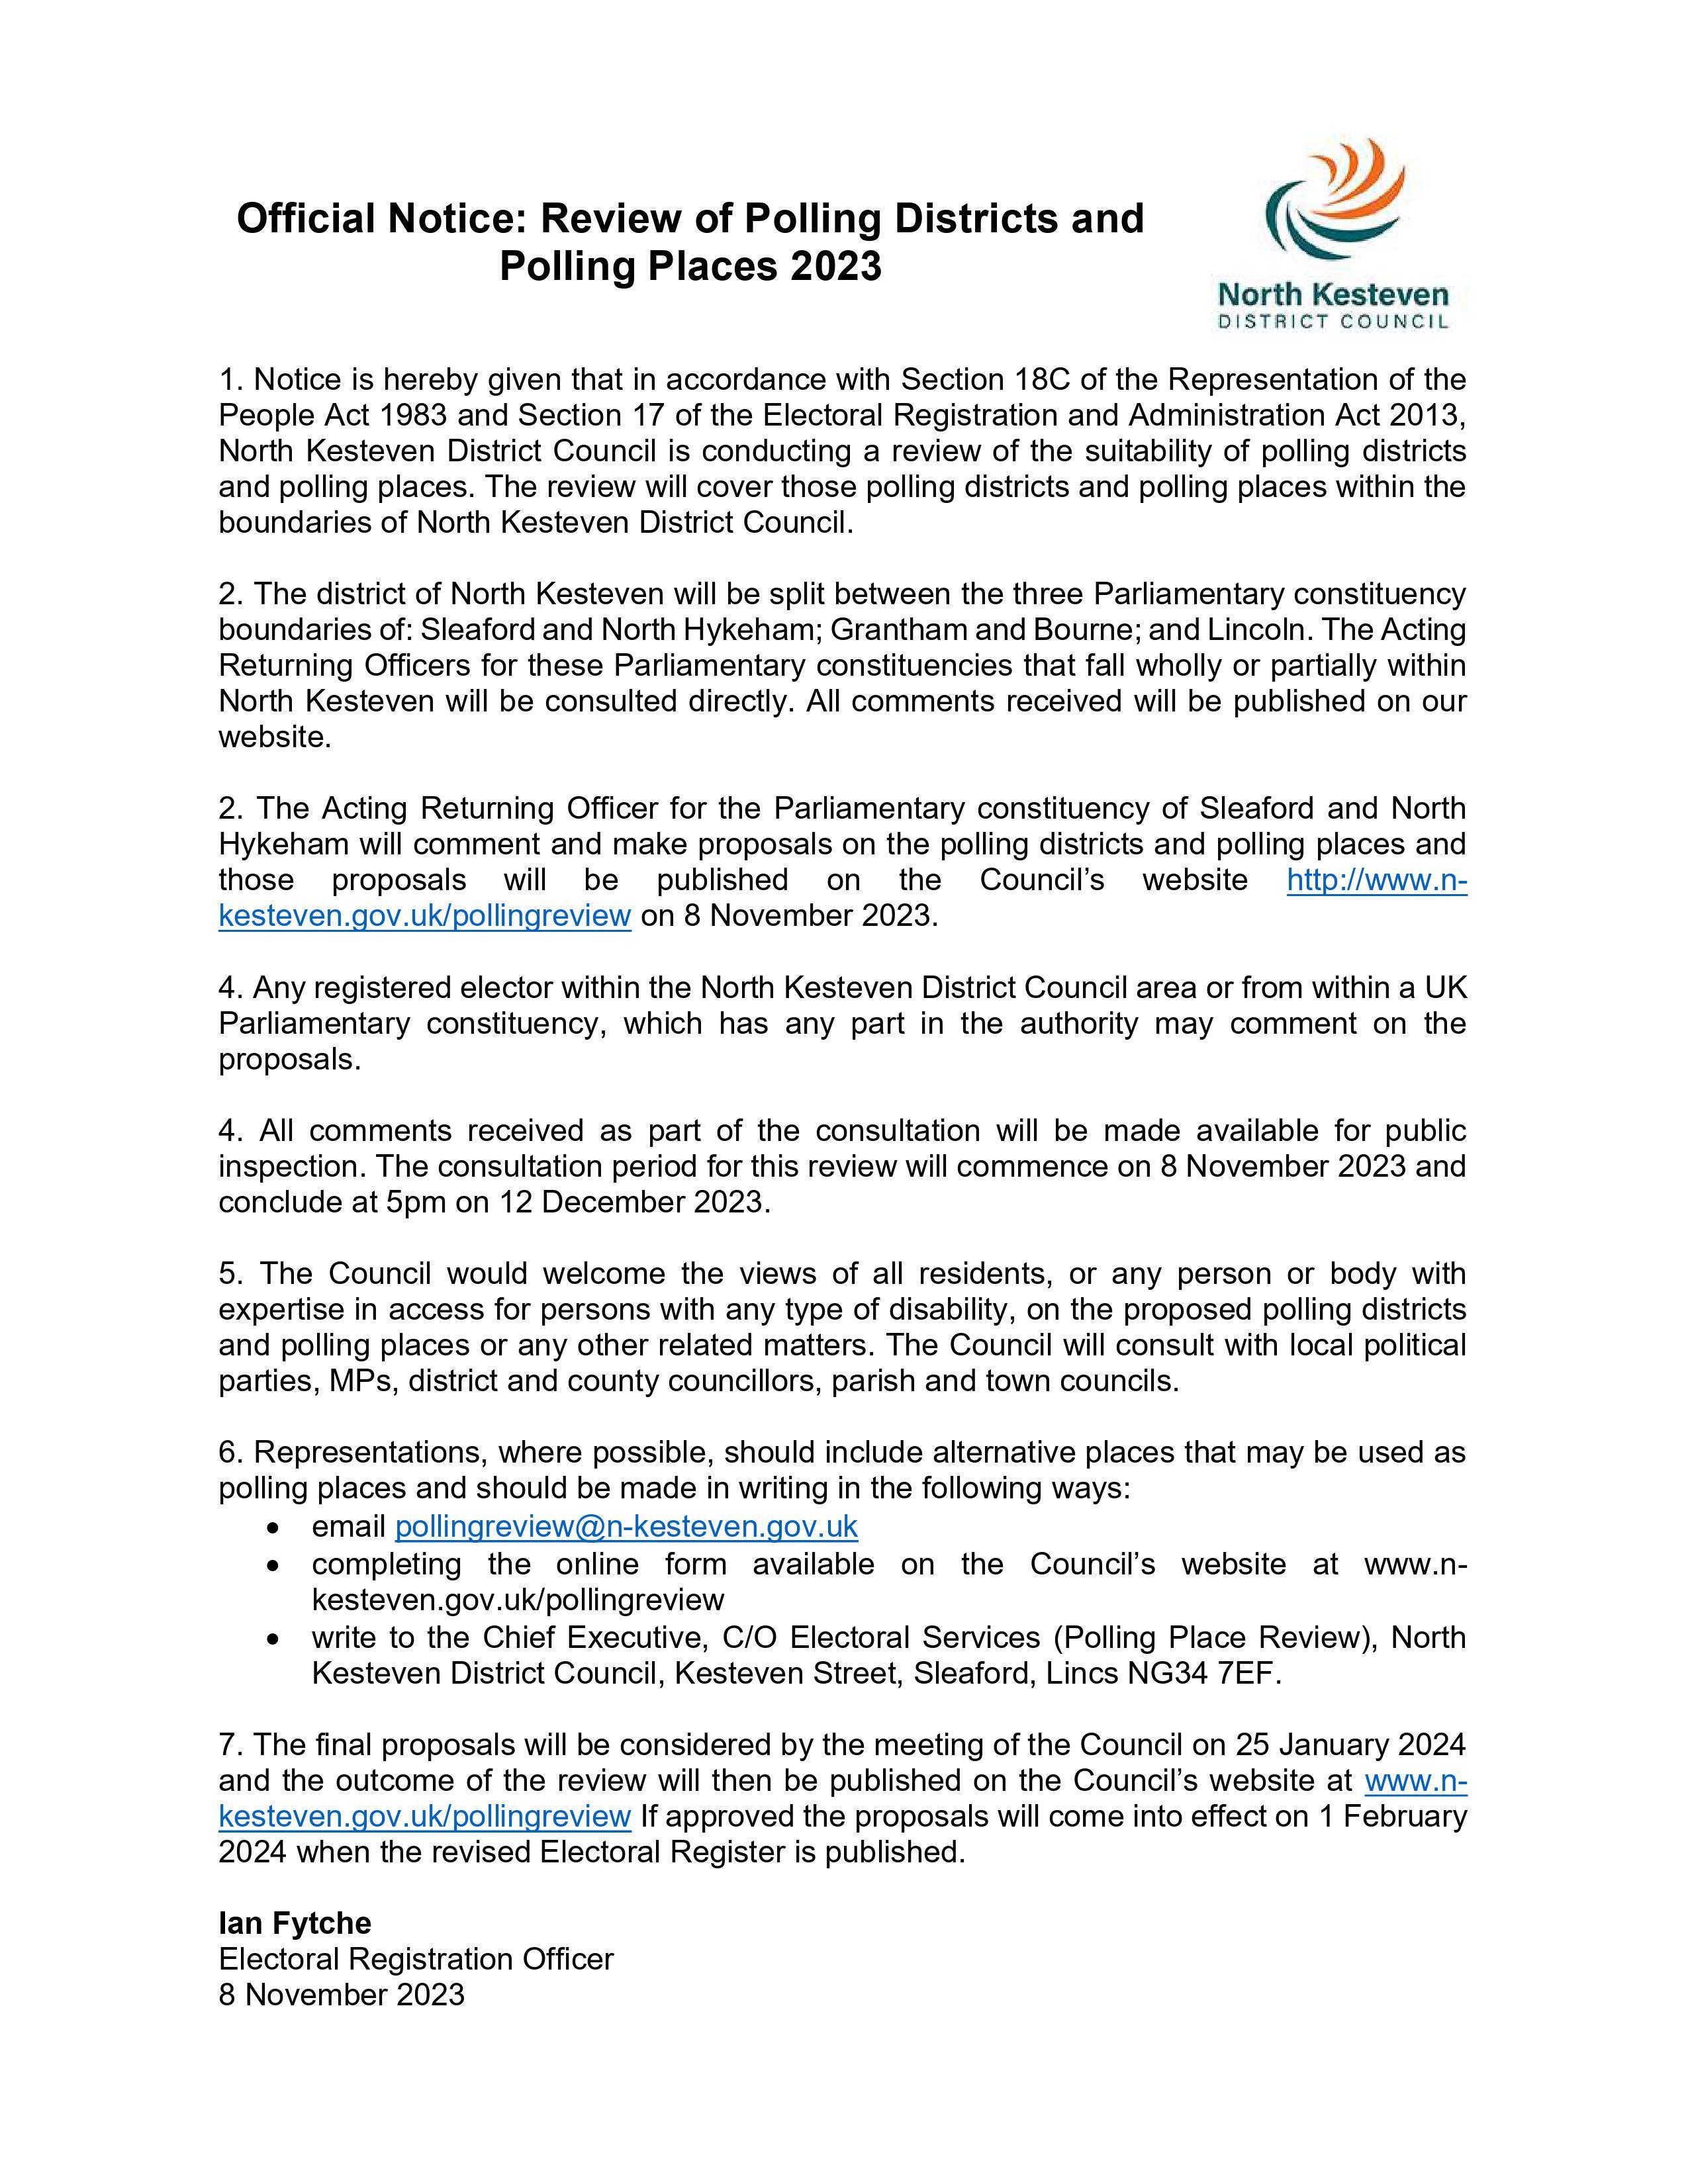 2023 Notice of review of polling places